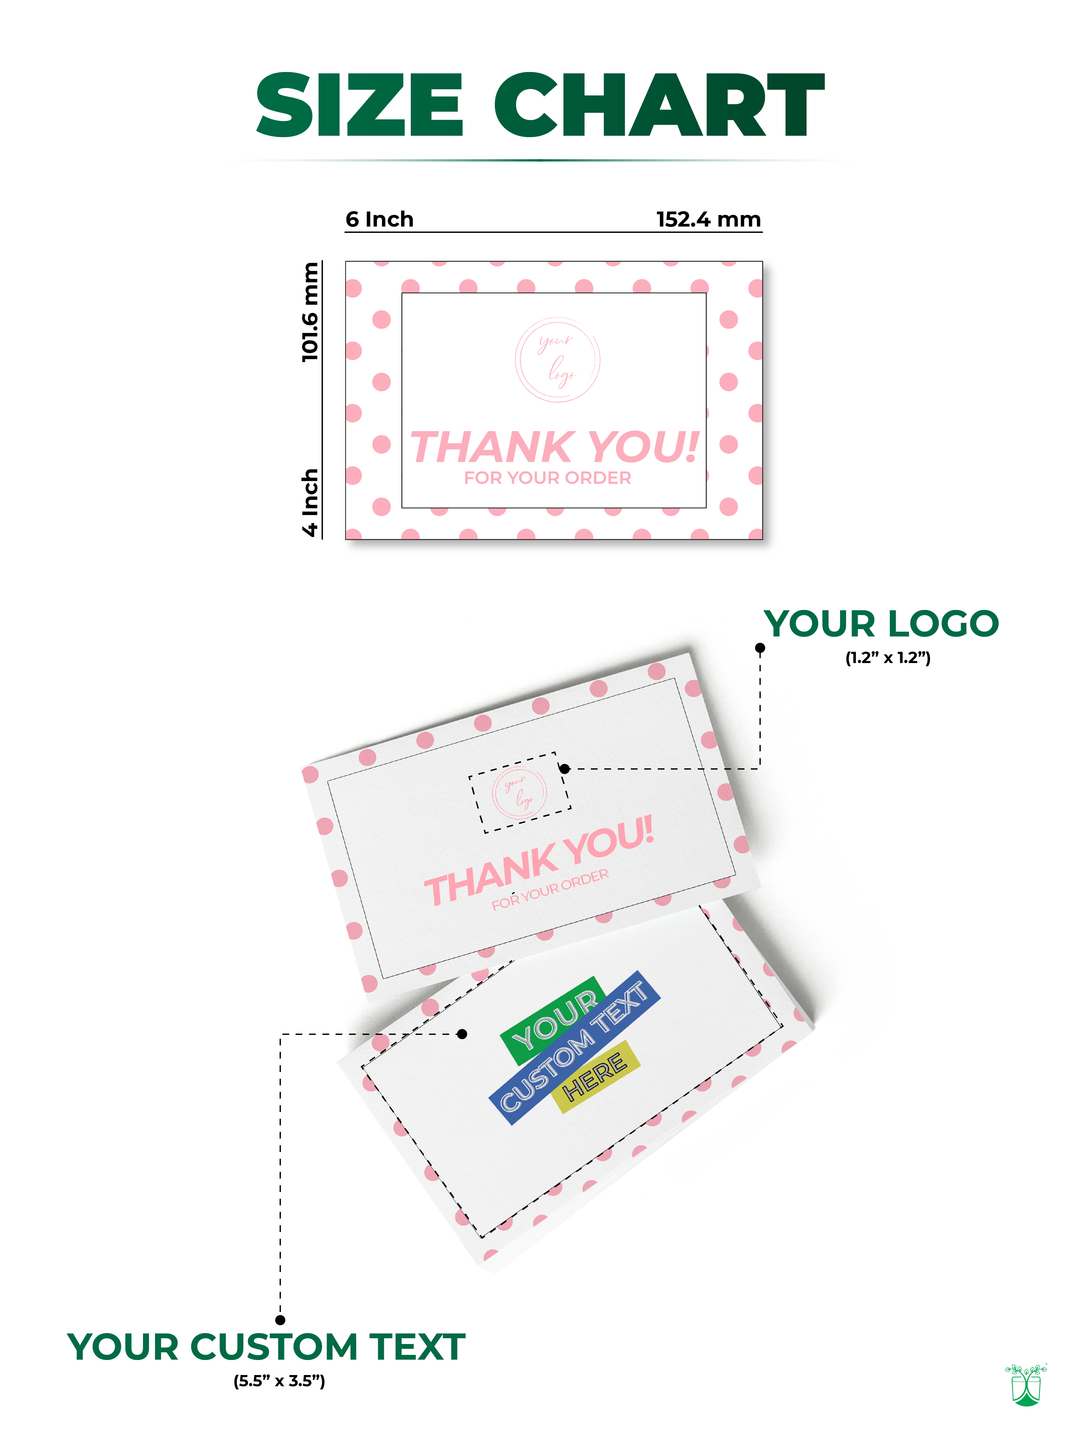 thank you cards | custom thank you cards | printed thank you cards | eco friendly thank you cards